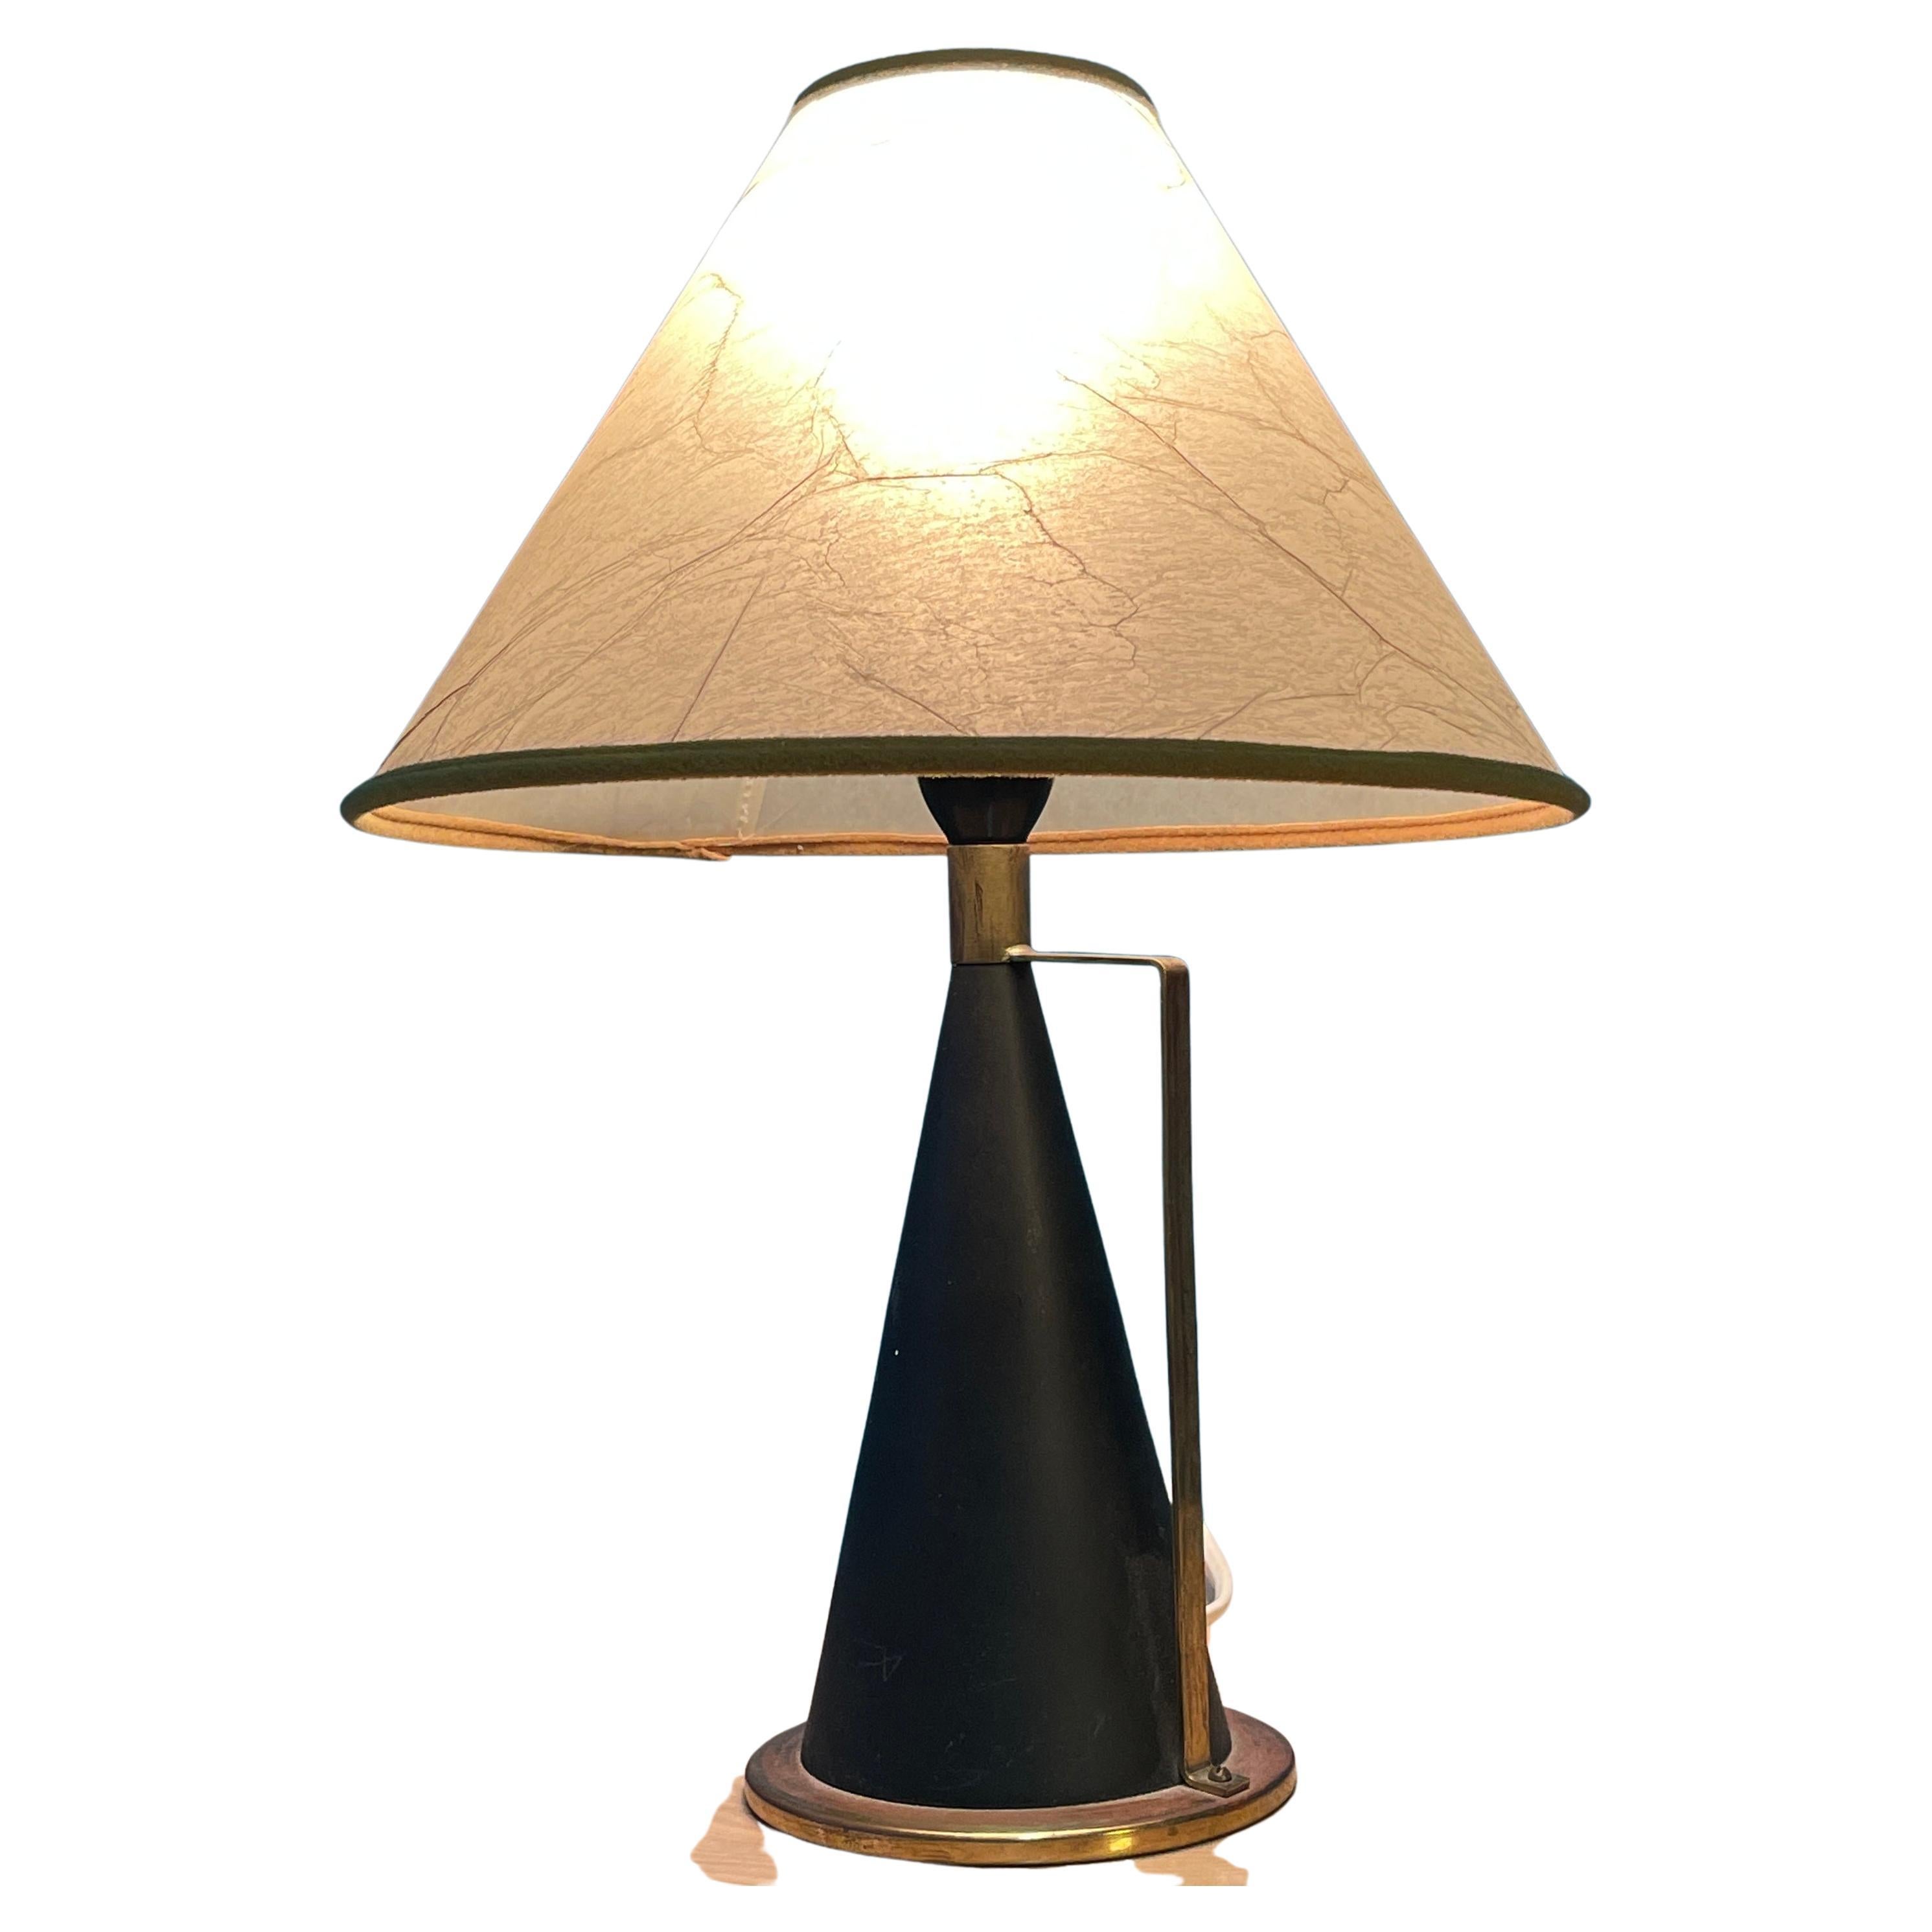 Simply and stylish table lamp with a brass handle. 
Designed by Maria Lindeman and manufactured by Idman Finland. 
Manufacturer's Stamp on the bottom.

The Cone-Shaped frame is black painted metal. Lower and Upper part of frame have Brass